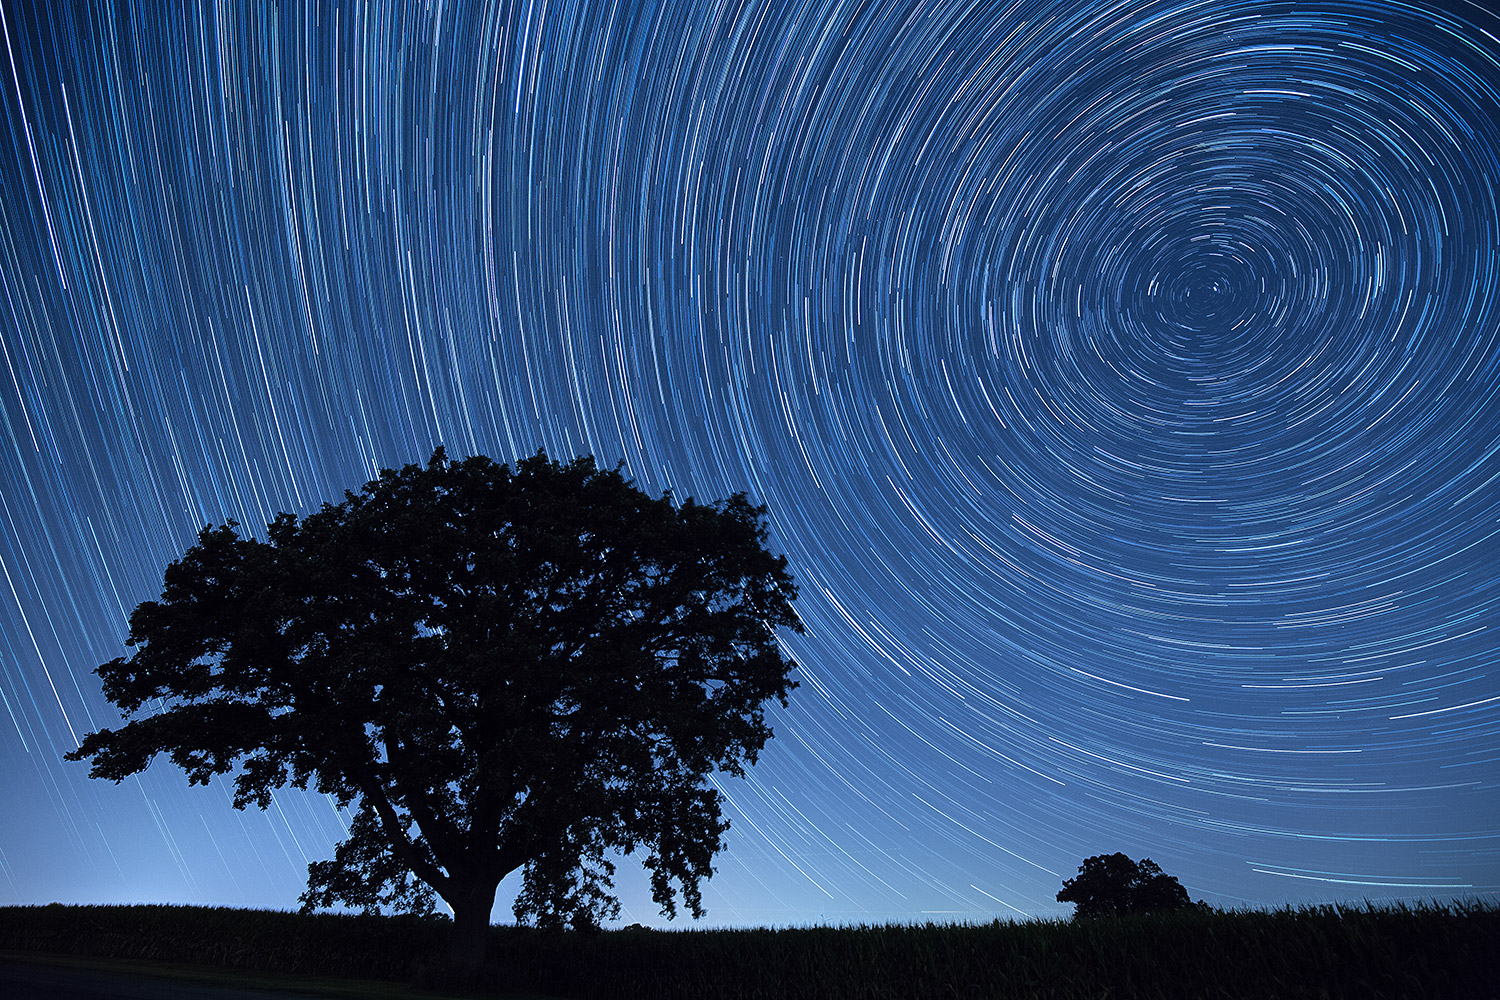 Star trails over a single tree